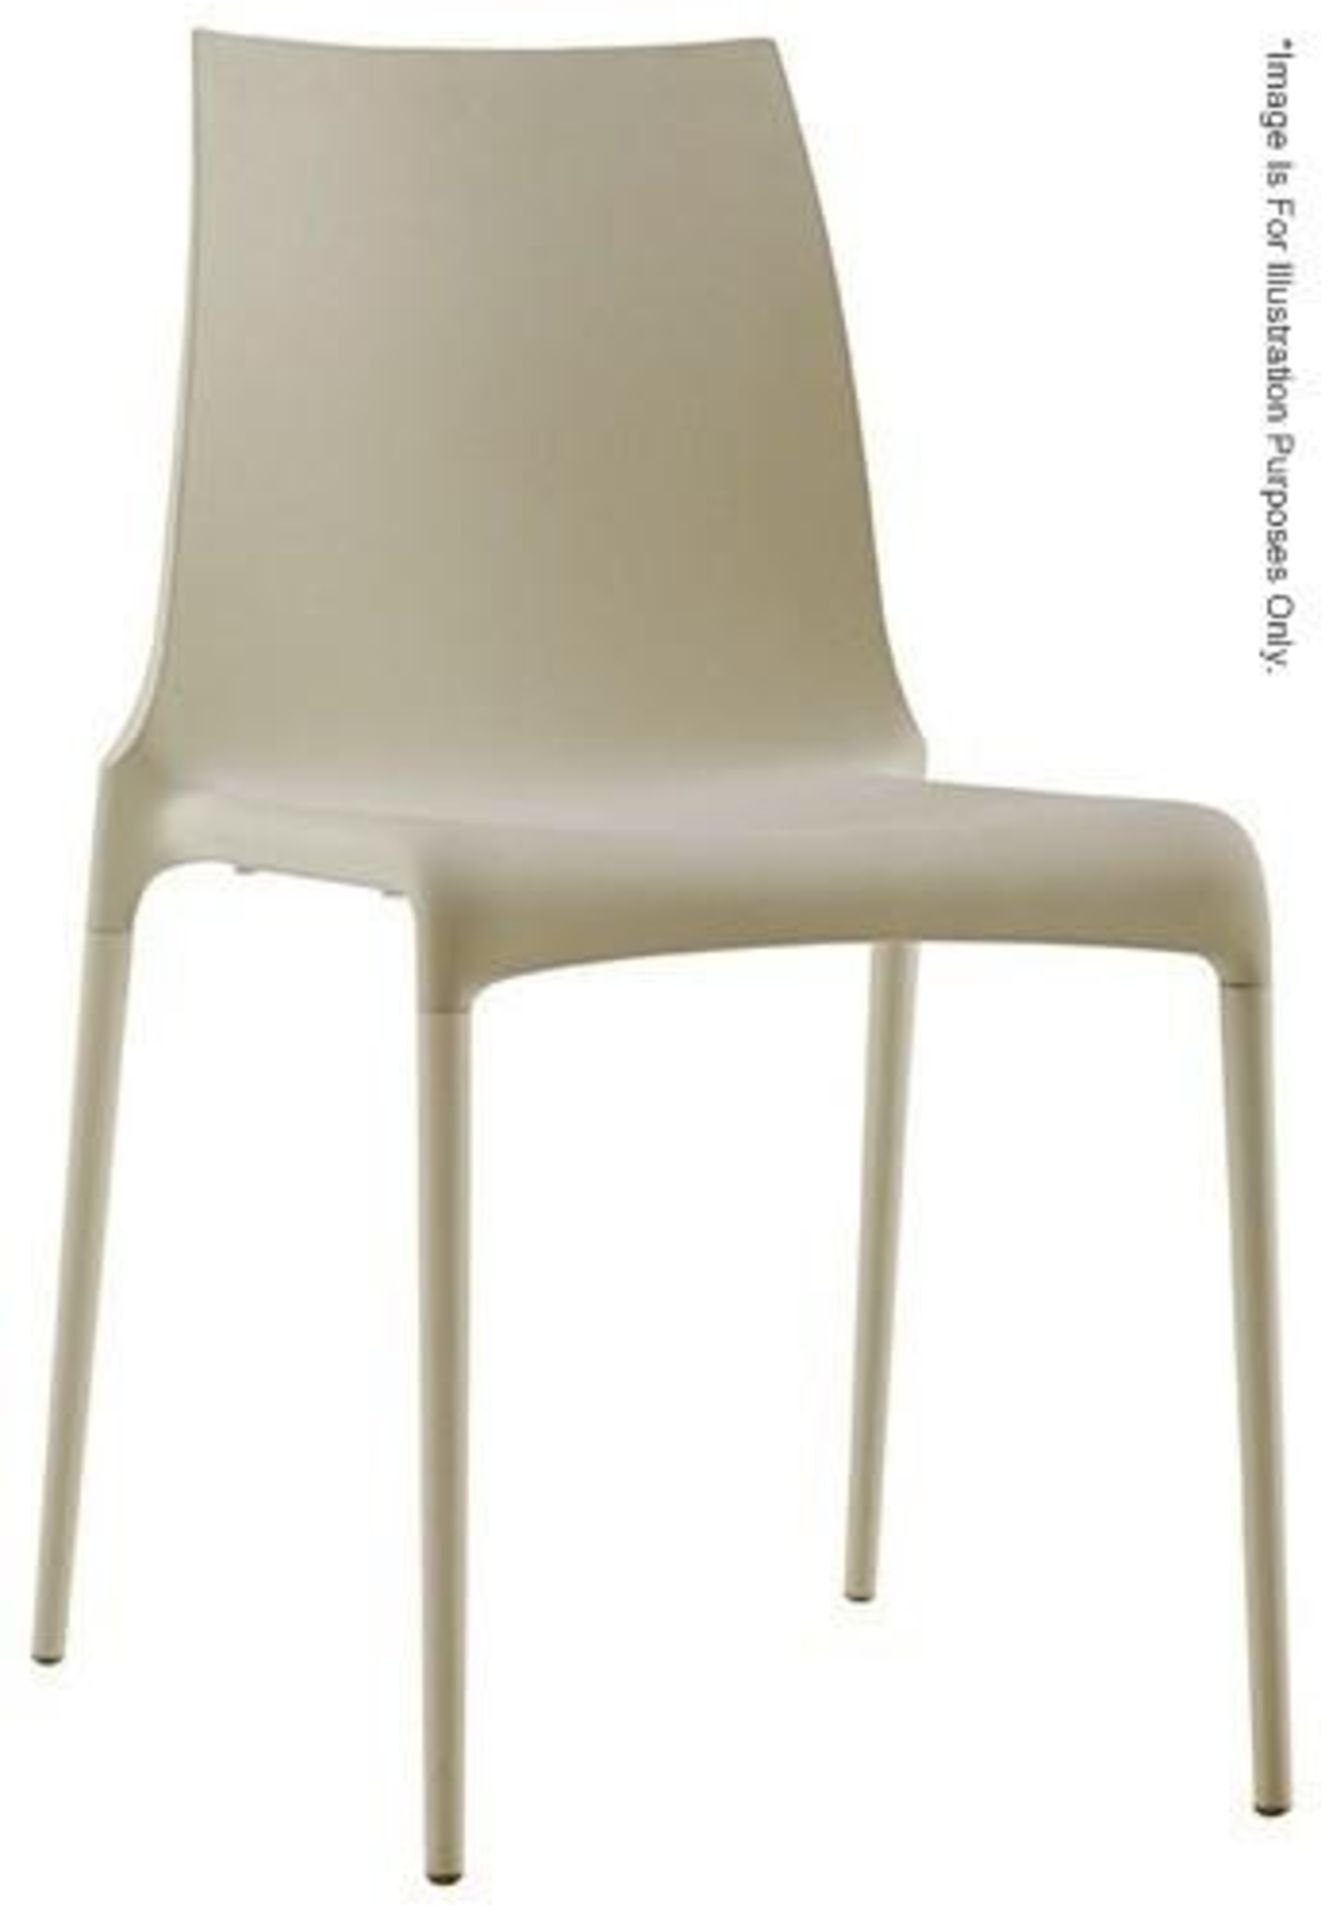 2 x LIGNE ROSET "Petra" Stackable Dining Chairs - Dimensions: W42 x D45 x H83, Seat Height: 46cm - - Image 2 of 7